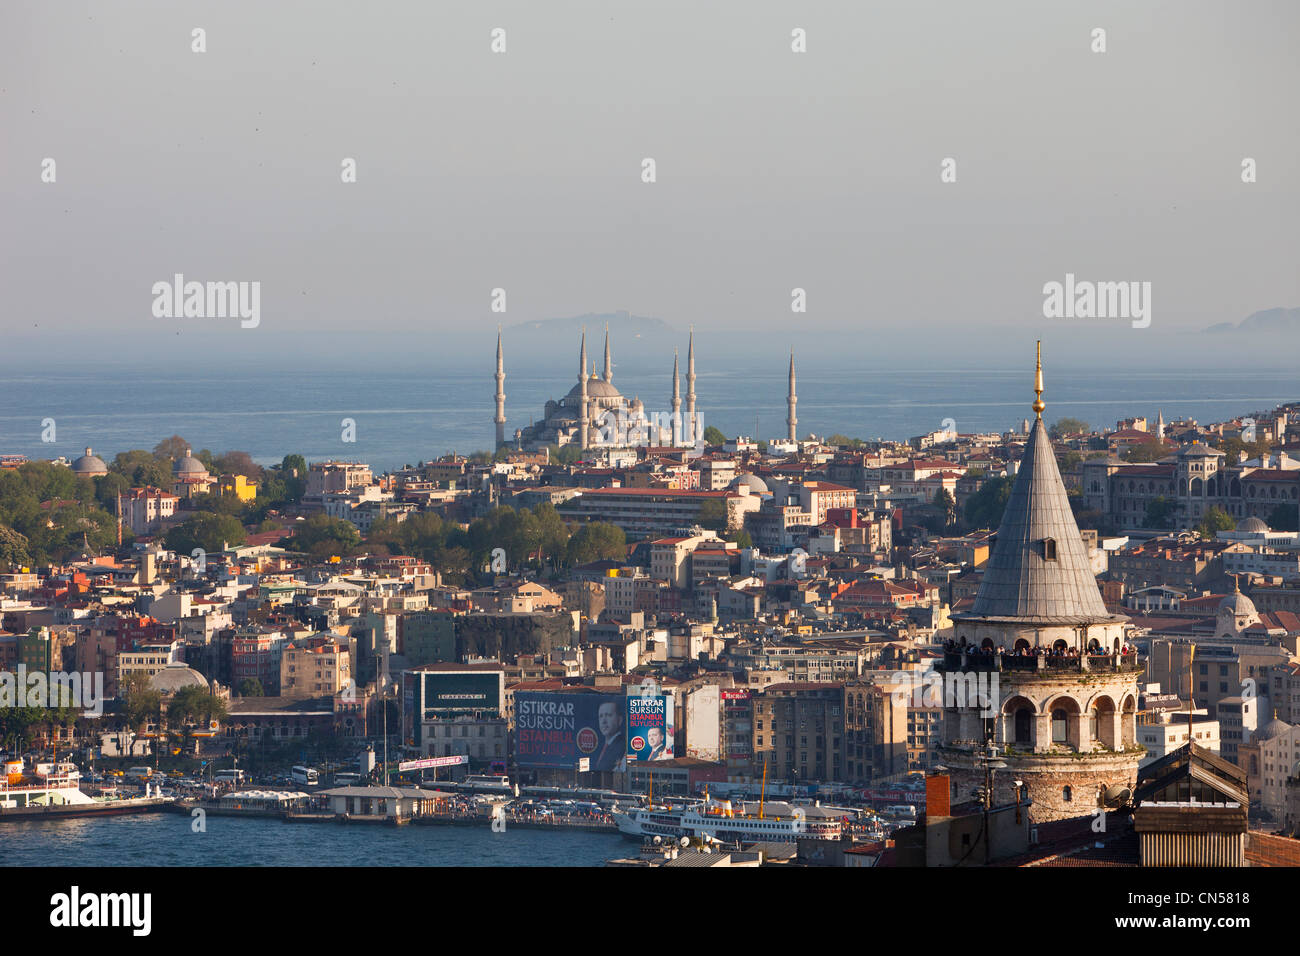 Turkey, Istanbul, Beyoglu, Galata Tower and the Blue Mosque in the background Stock Photo